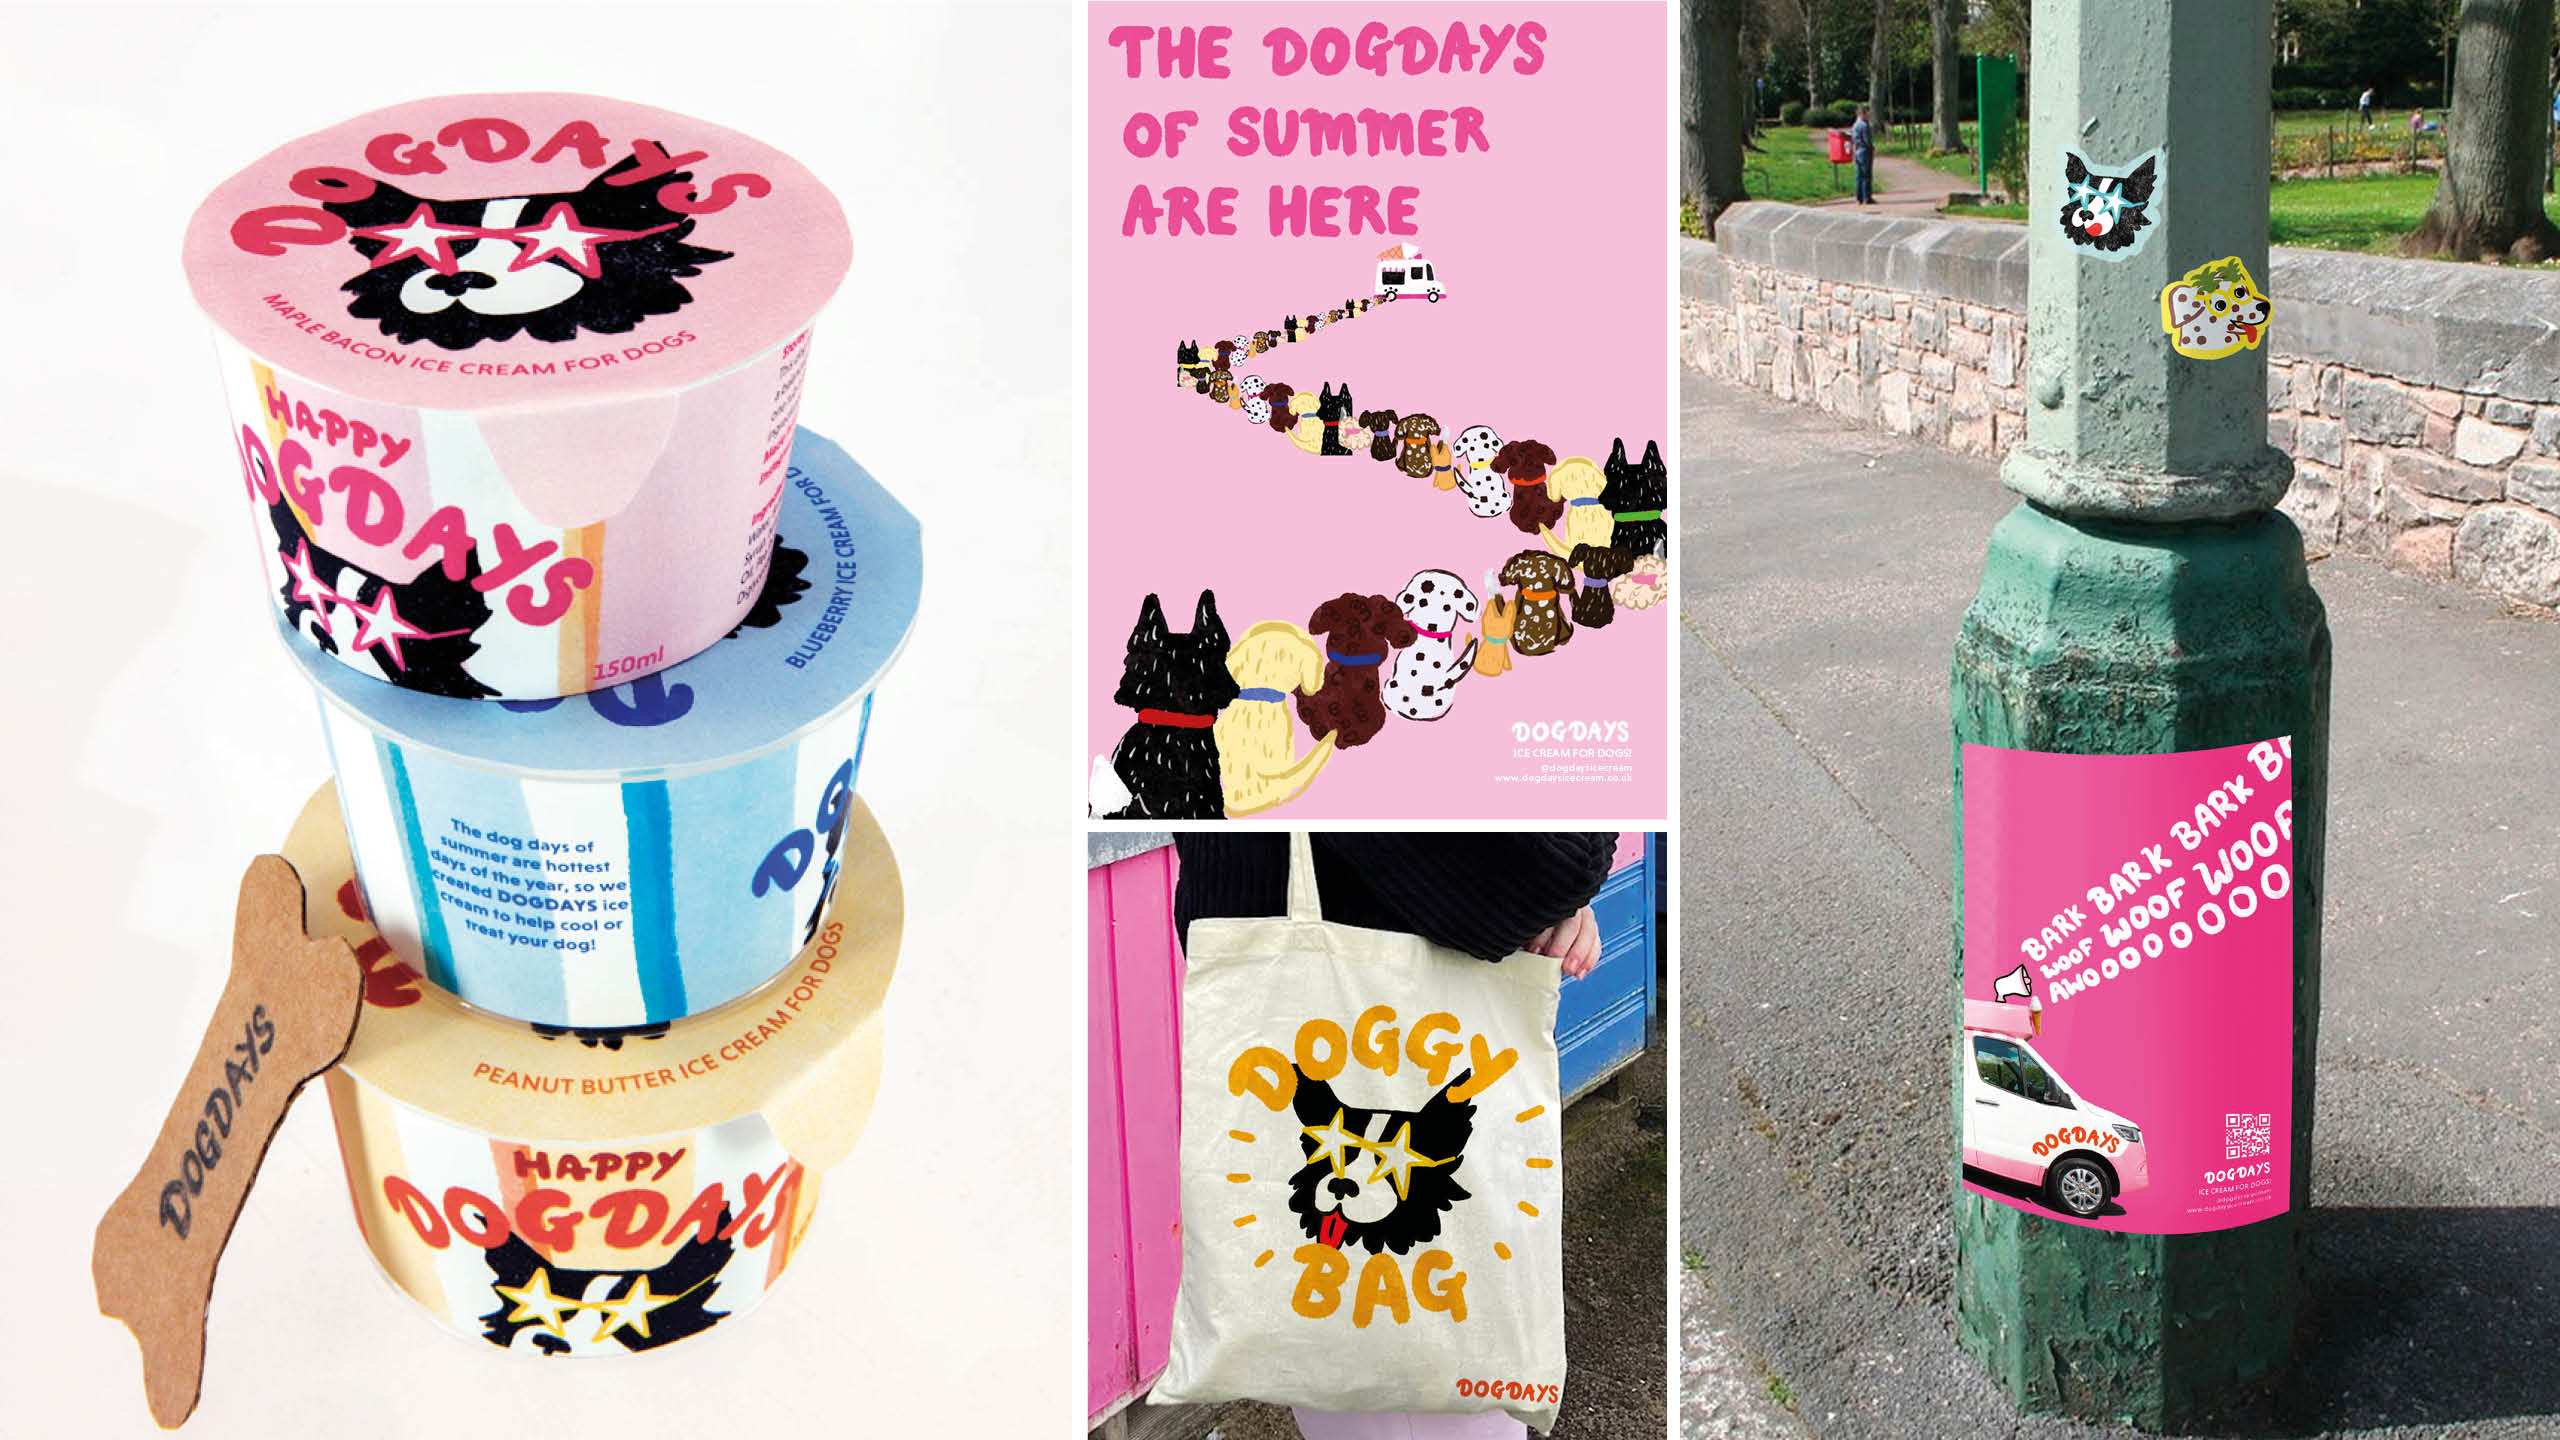 Brand extensions for Dog Days ice cream for dogs by Louise Awcock, showing posters, tote bag and packaging.